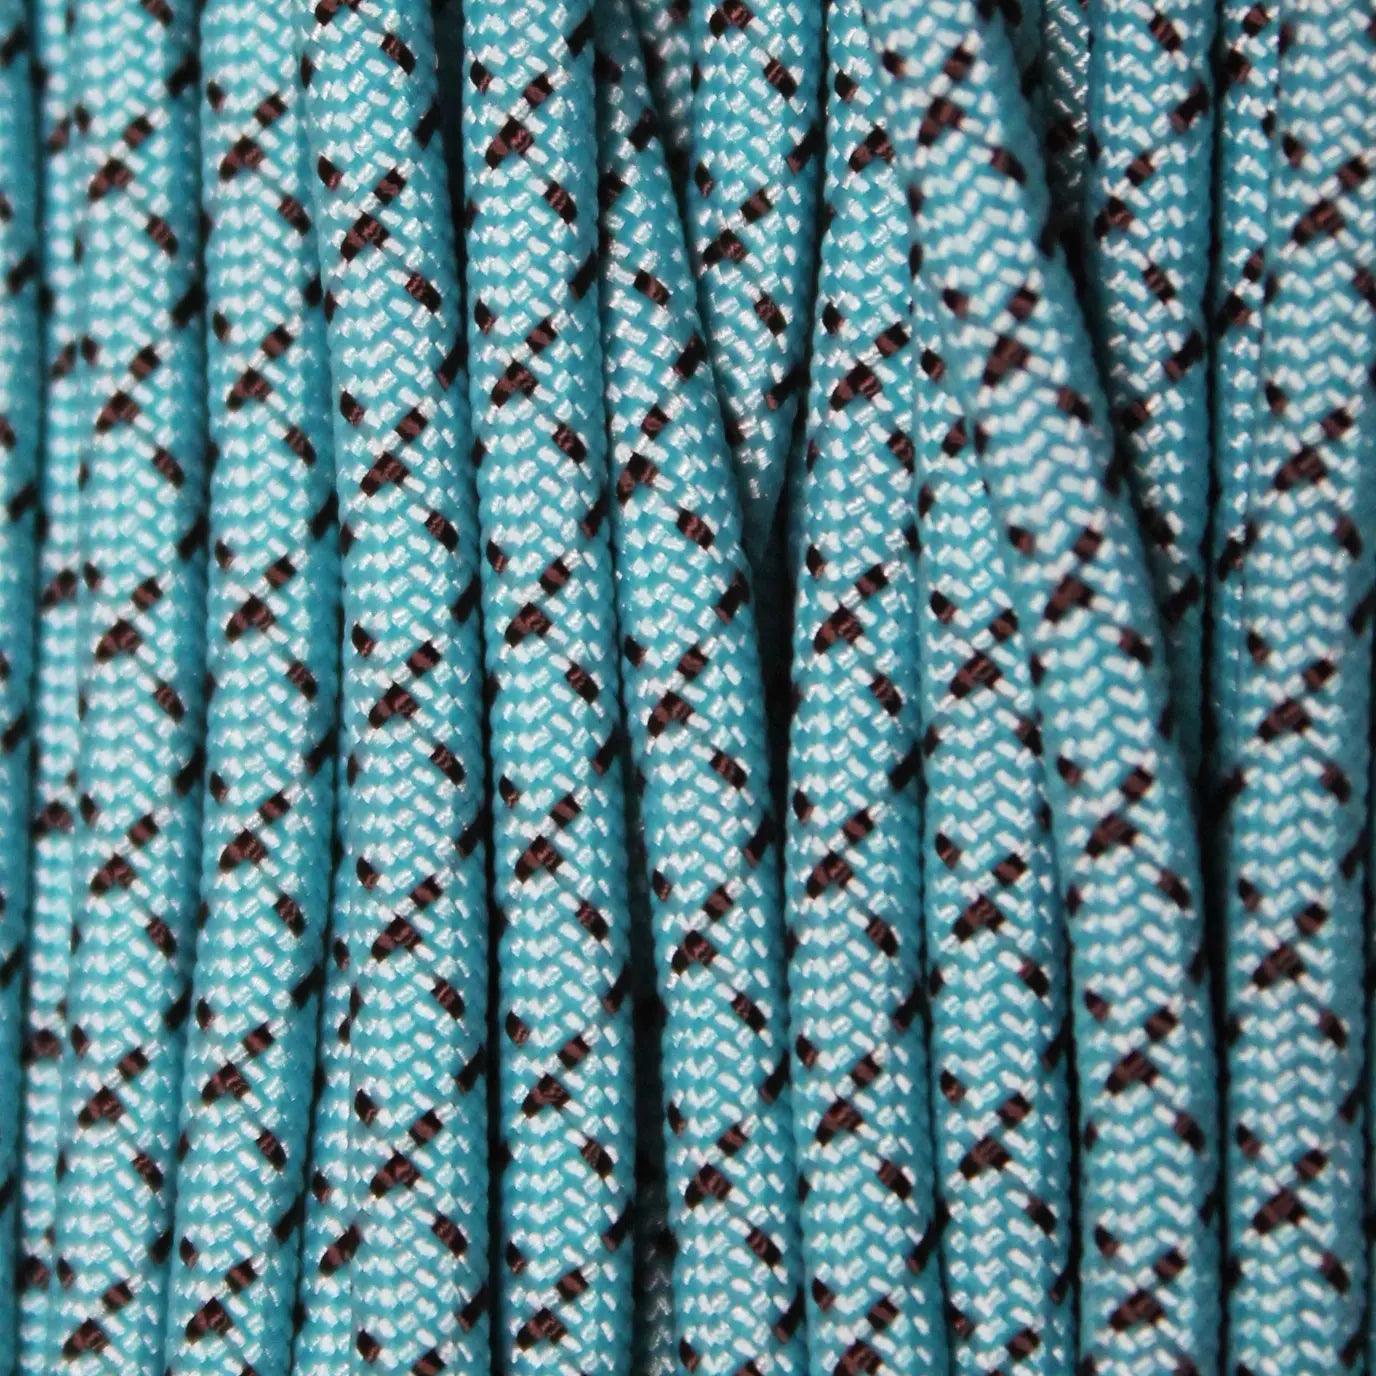 Starry Night-Neon Turquoise with Black 550 Paracord Made in the USA (100 FT.)  163- nylon/nylon paracord